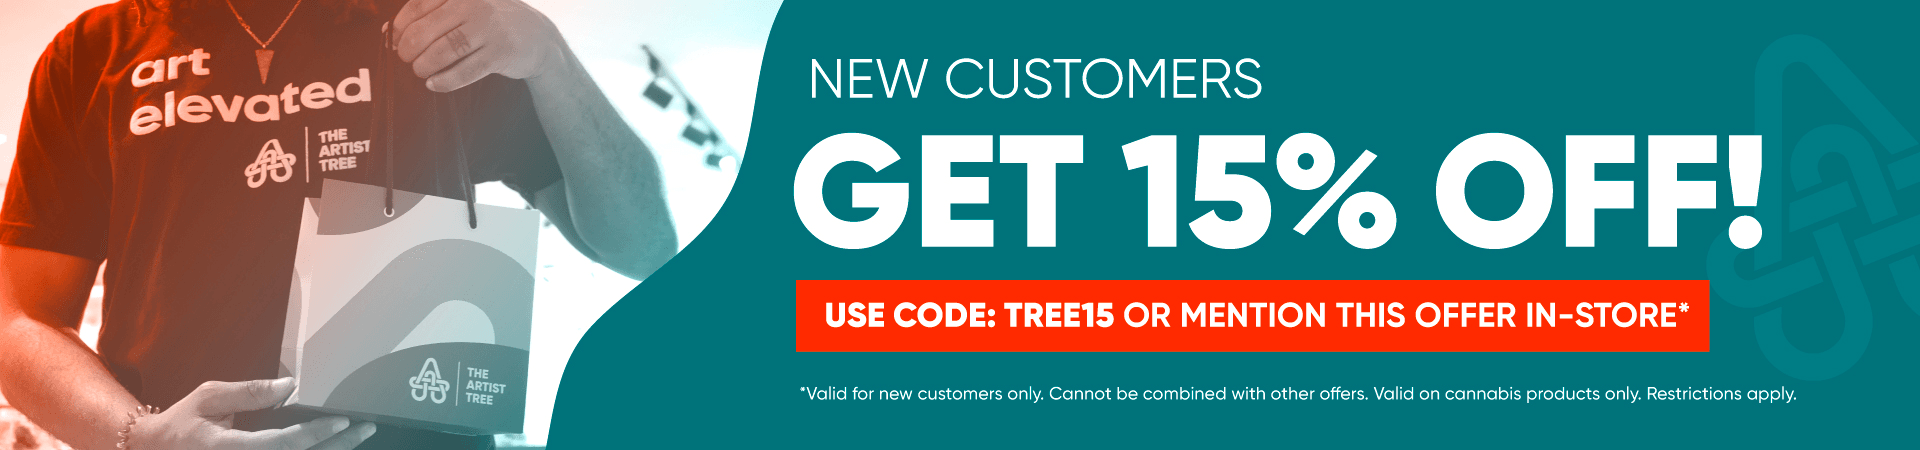 New Customers Get 15% off! use code: TREE15